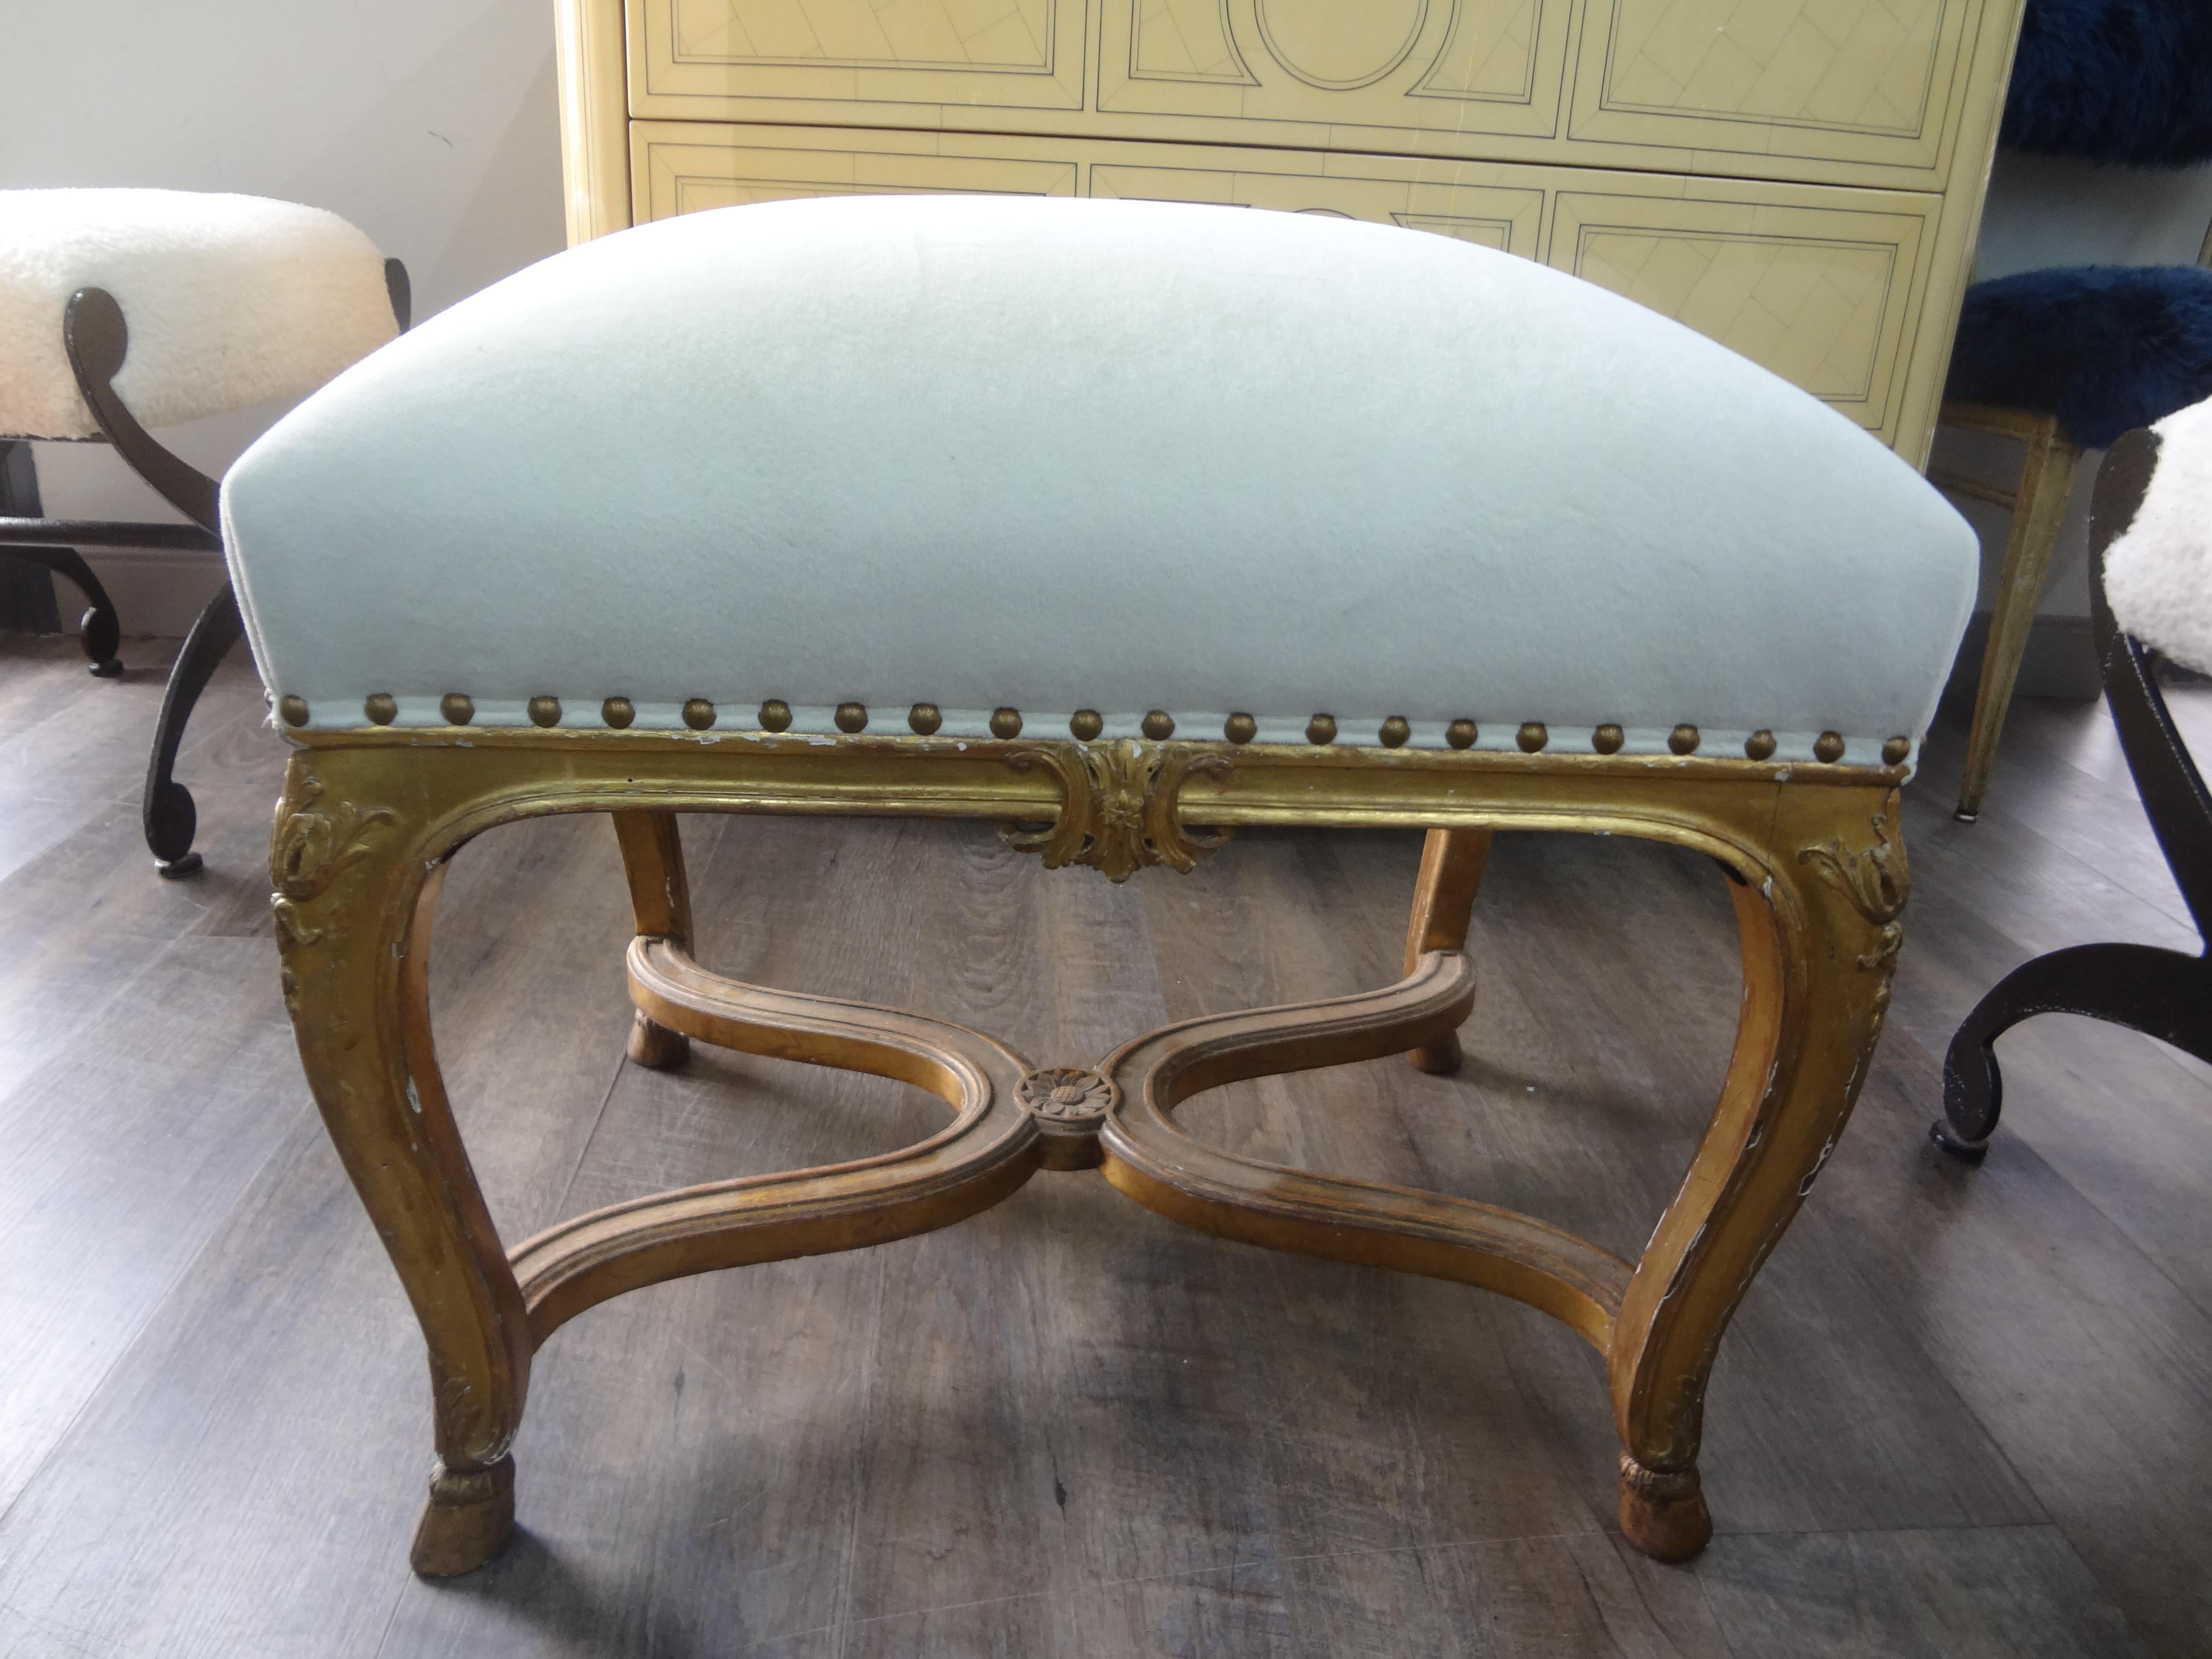 Pair of 19th century Italian Louis xvi style giltwood benches.
This lovely pair of large antique Italian giltwood benches, ottomans, or stools are substantial and large enough for extra seating. These beautiful Italian giltwood benches have been